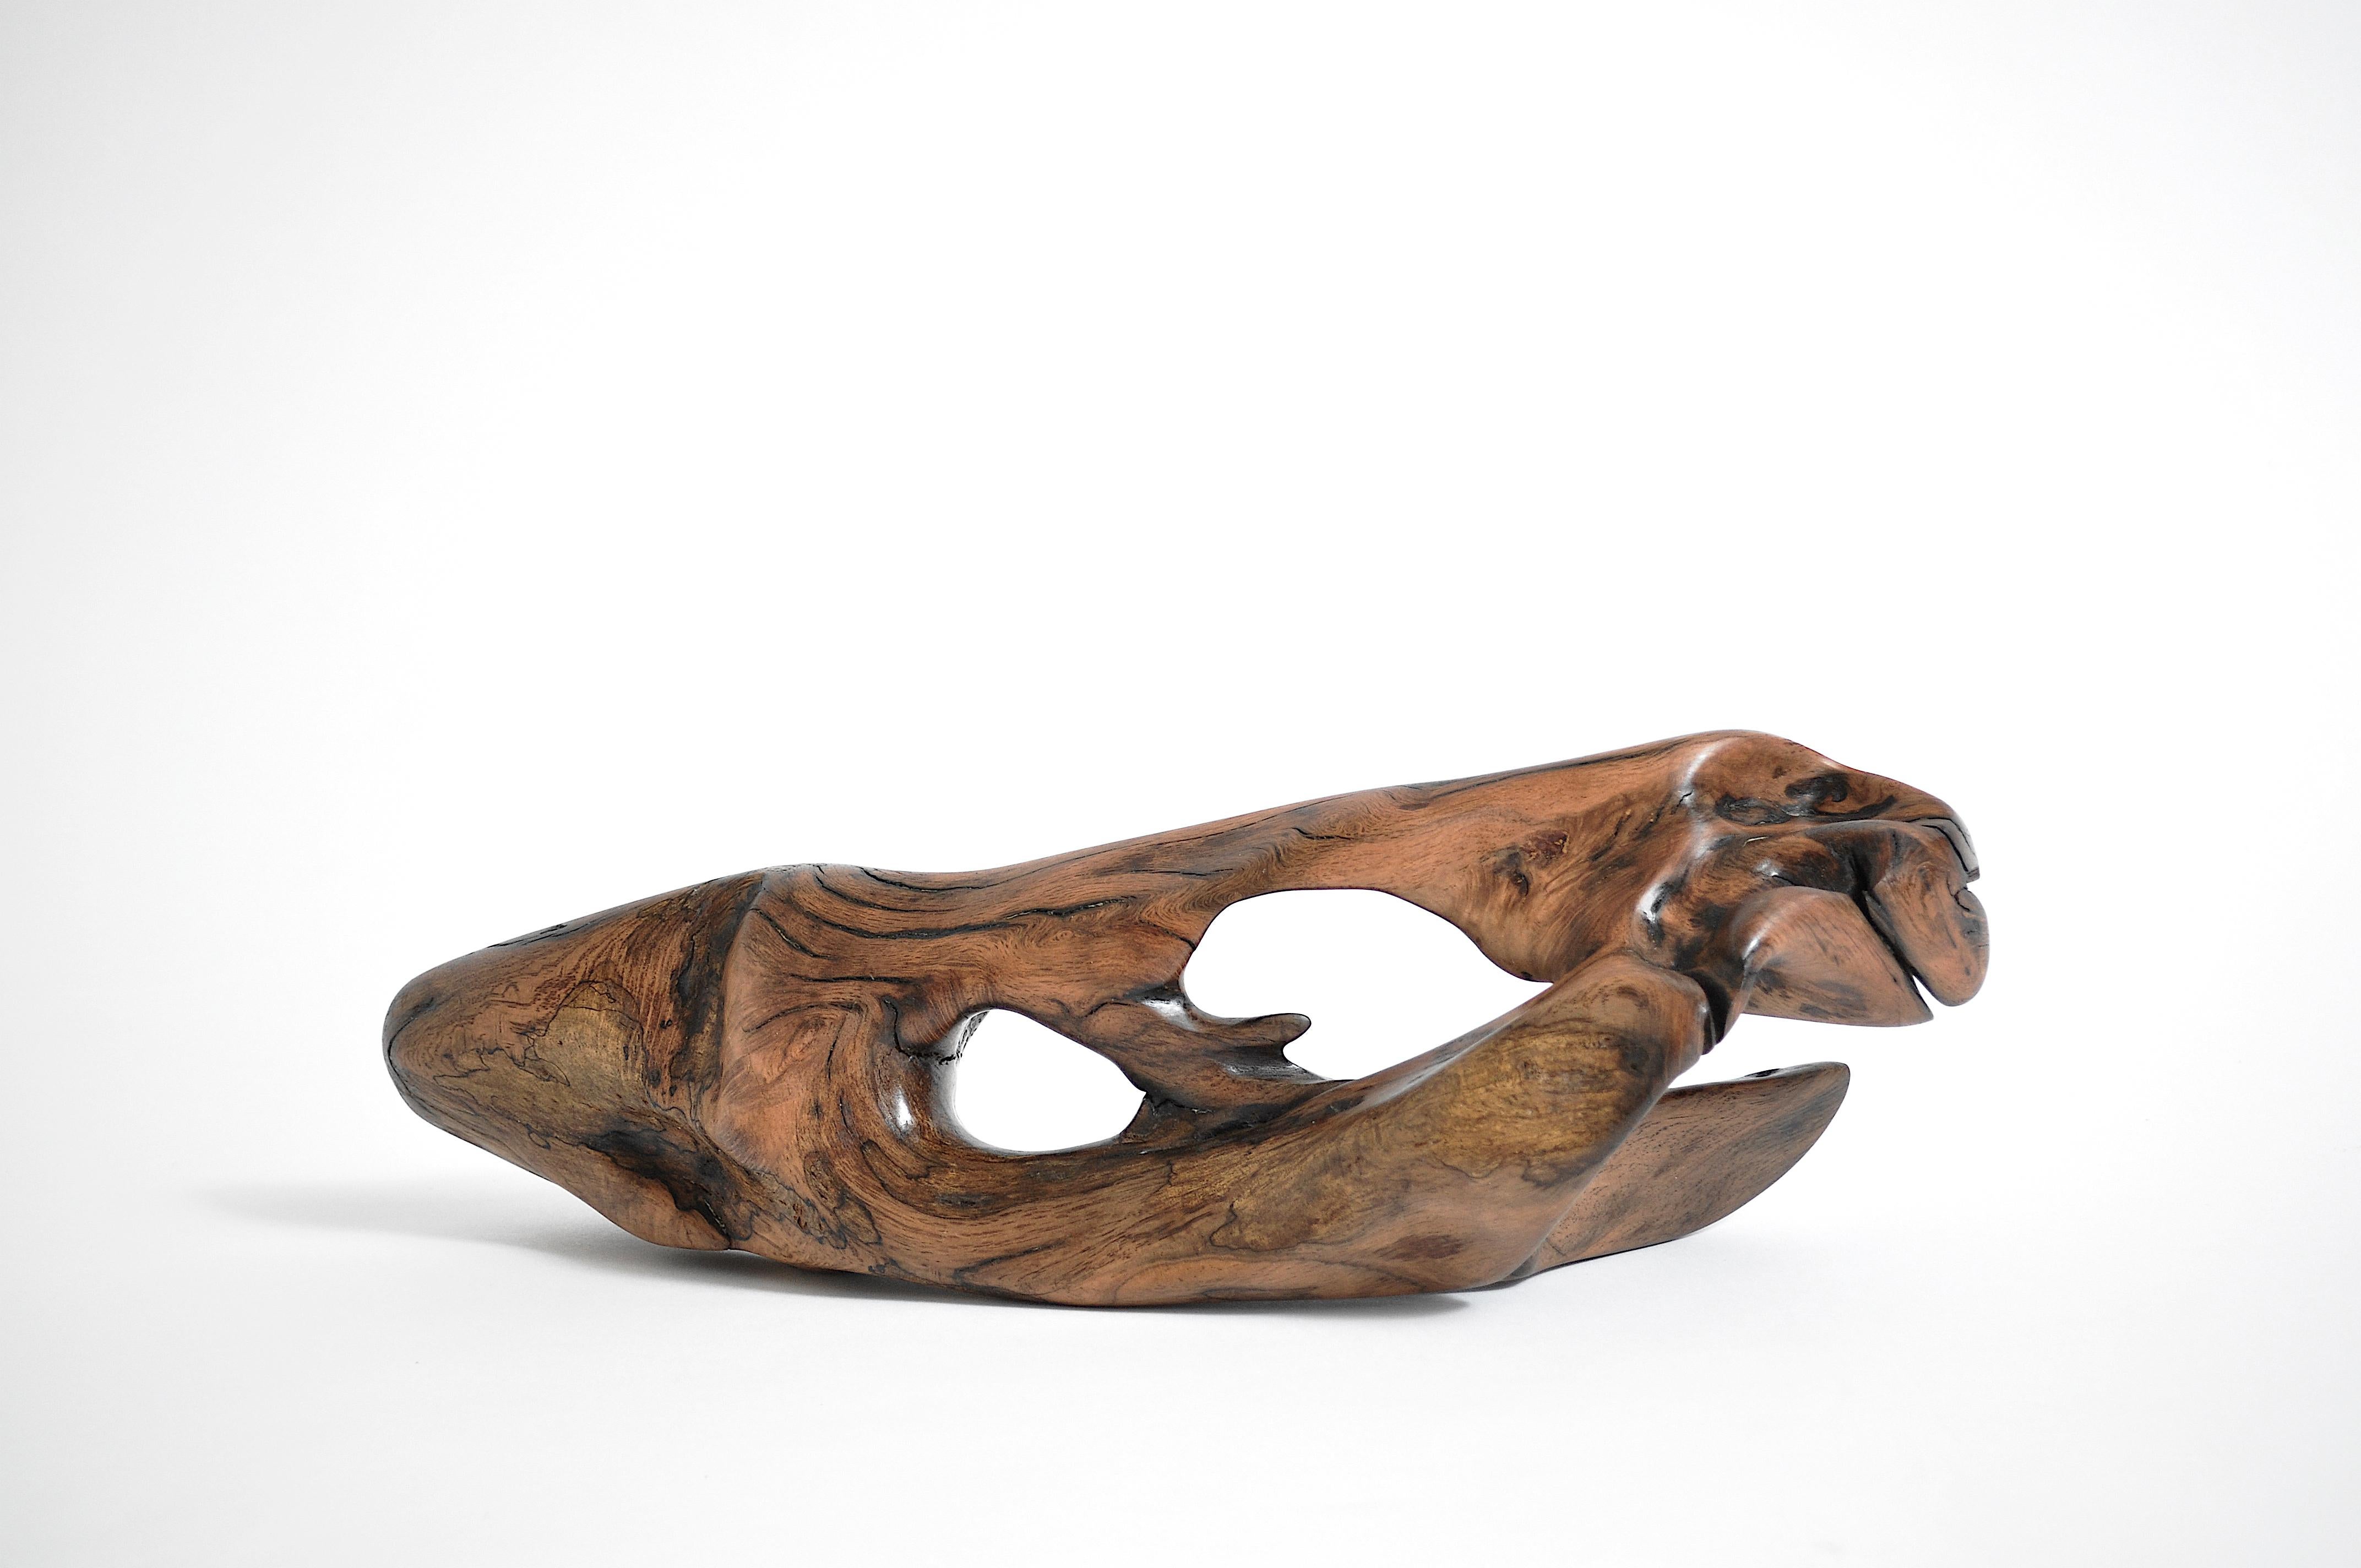 Polished Unique Tropical Driftwood Sculpture Signed by Jörg Pietschmann